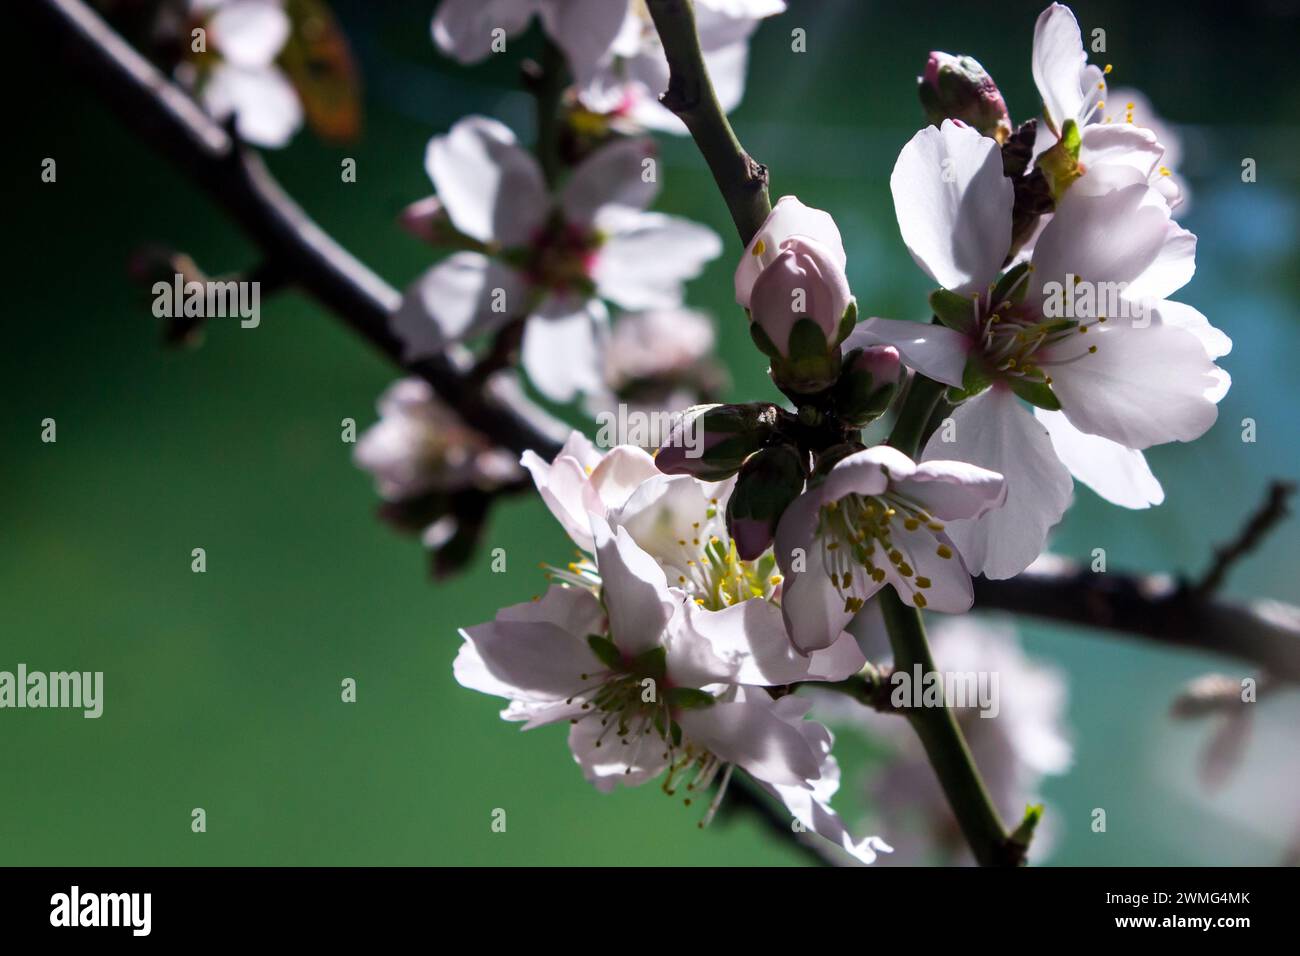 A branch of a Sweet almond Prunus dulcis, covered in delicate white blossoms and flower buds in the early spring against a greenish blue background. Stock Photo